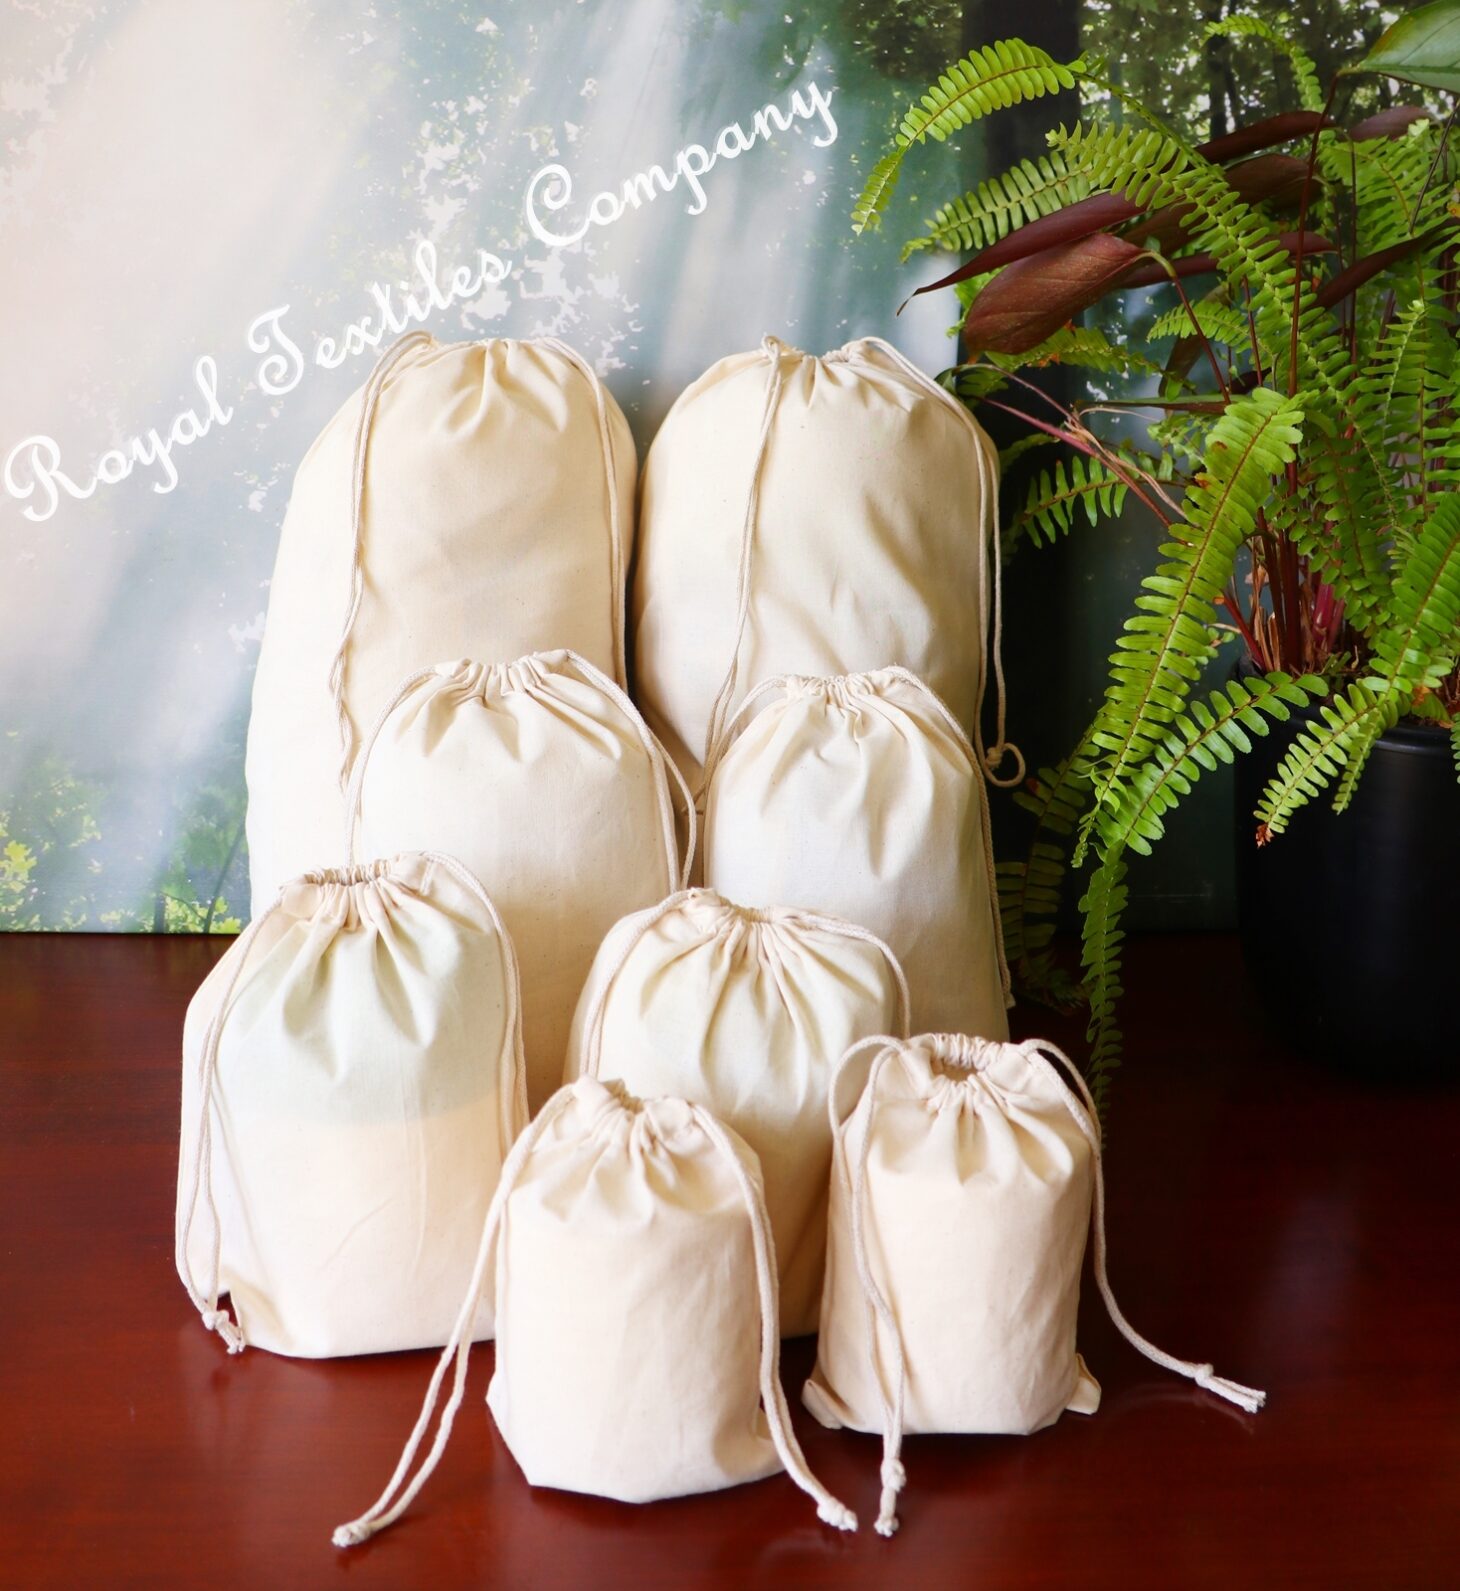 8"x10" inches Natural Cotton Muslin bags *Eco-Friendly* Choose from QTY Size 